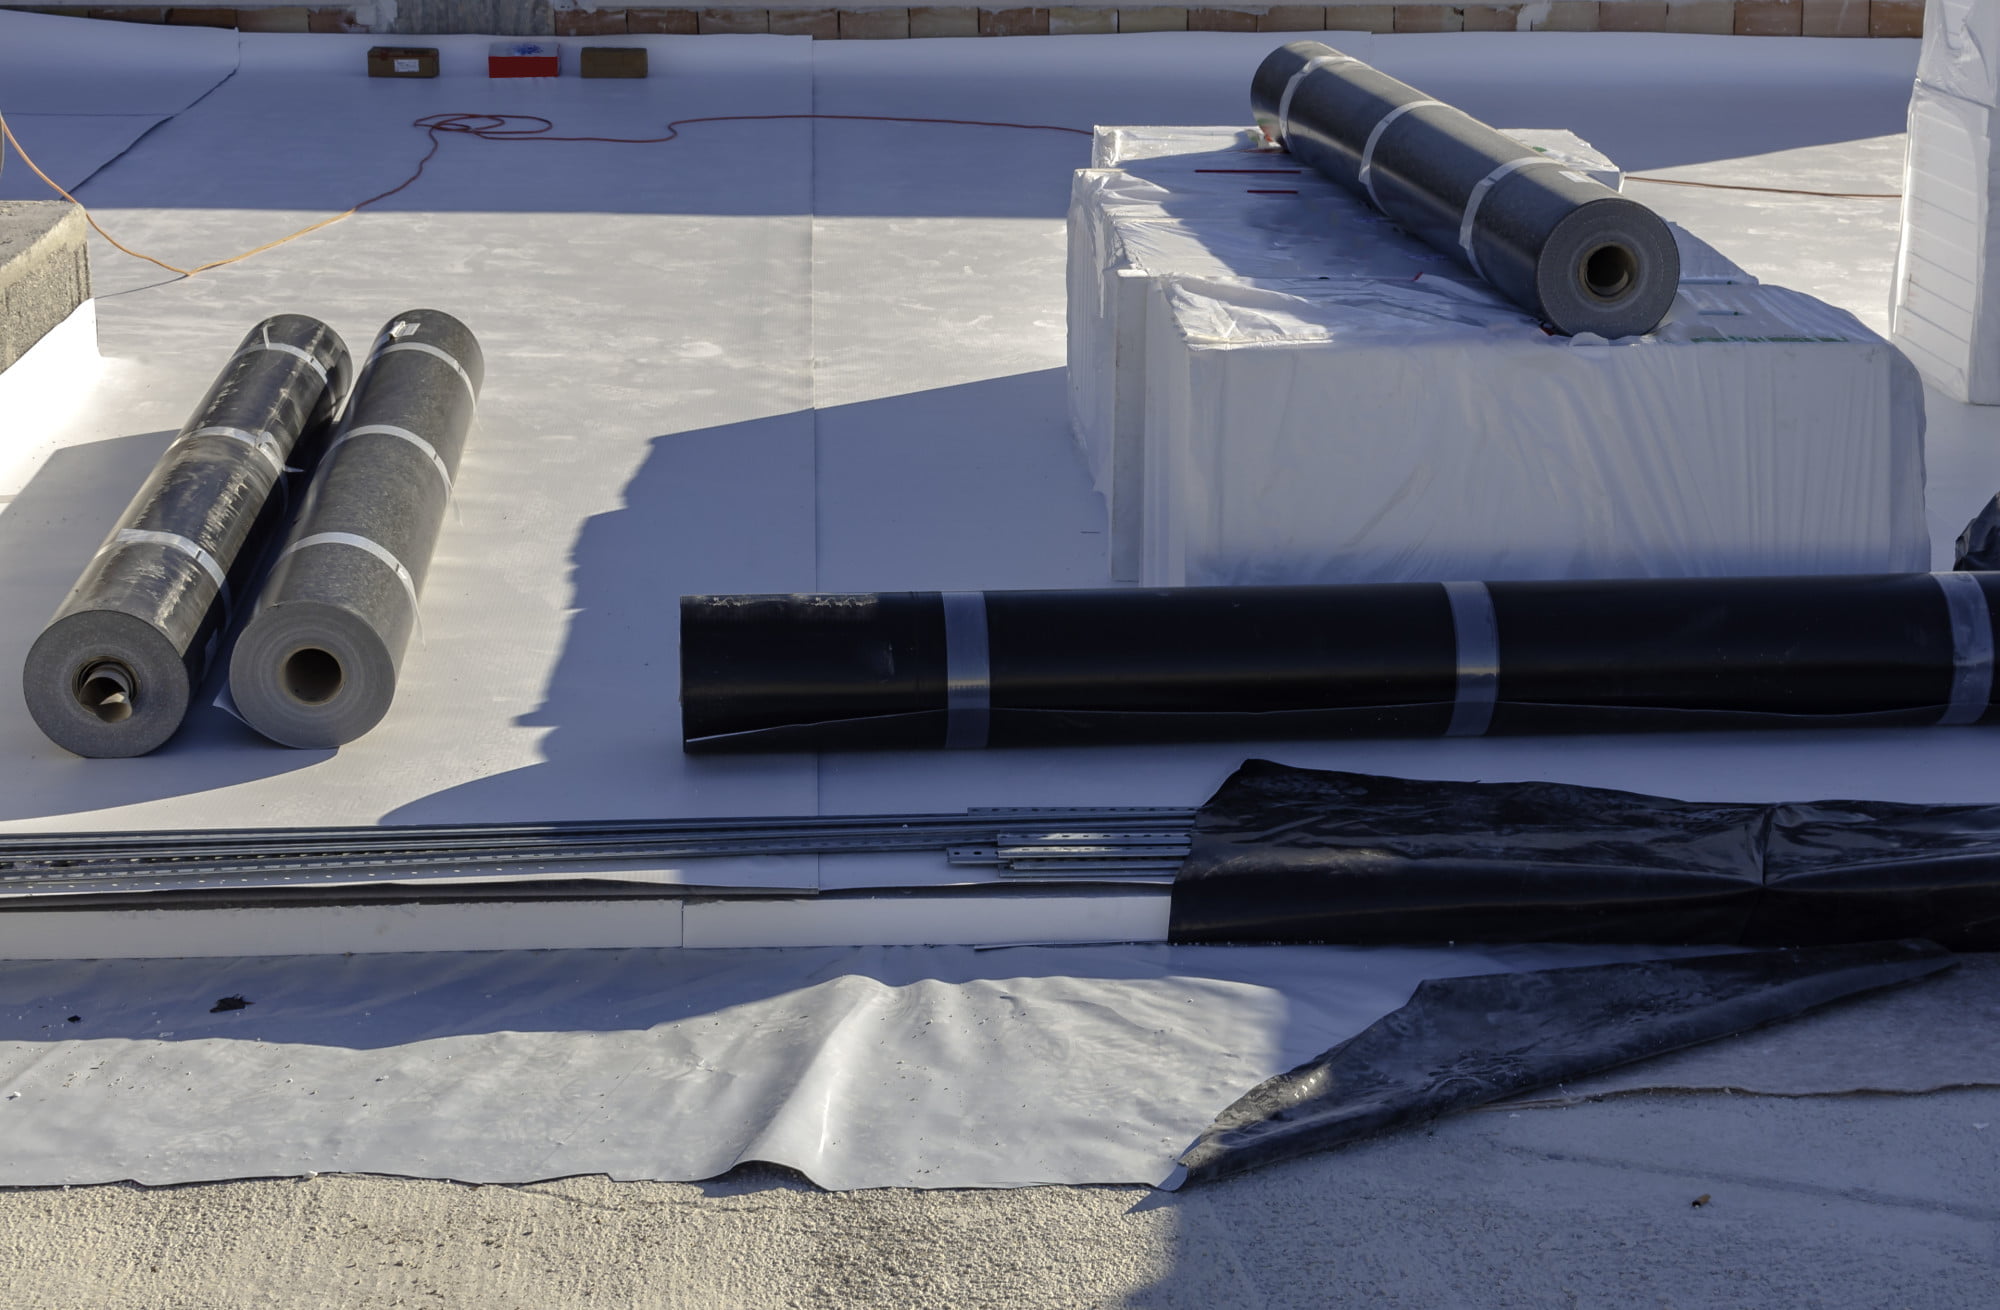 Stratigraphy Of The Materials To Waterproof A Terrace In A New Building With The Following Products: 4 Mm Pvc, Polystyrene, Non Woven Fabric And 2 Mm Polyethylene